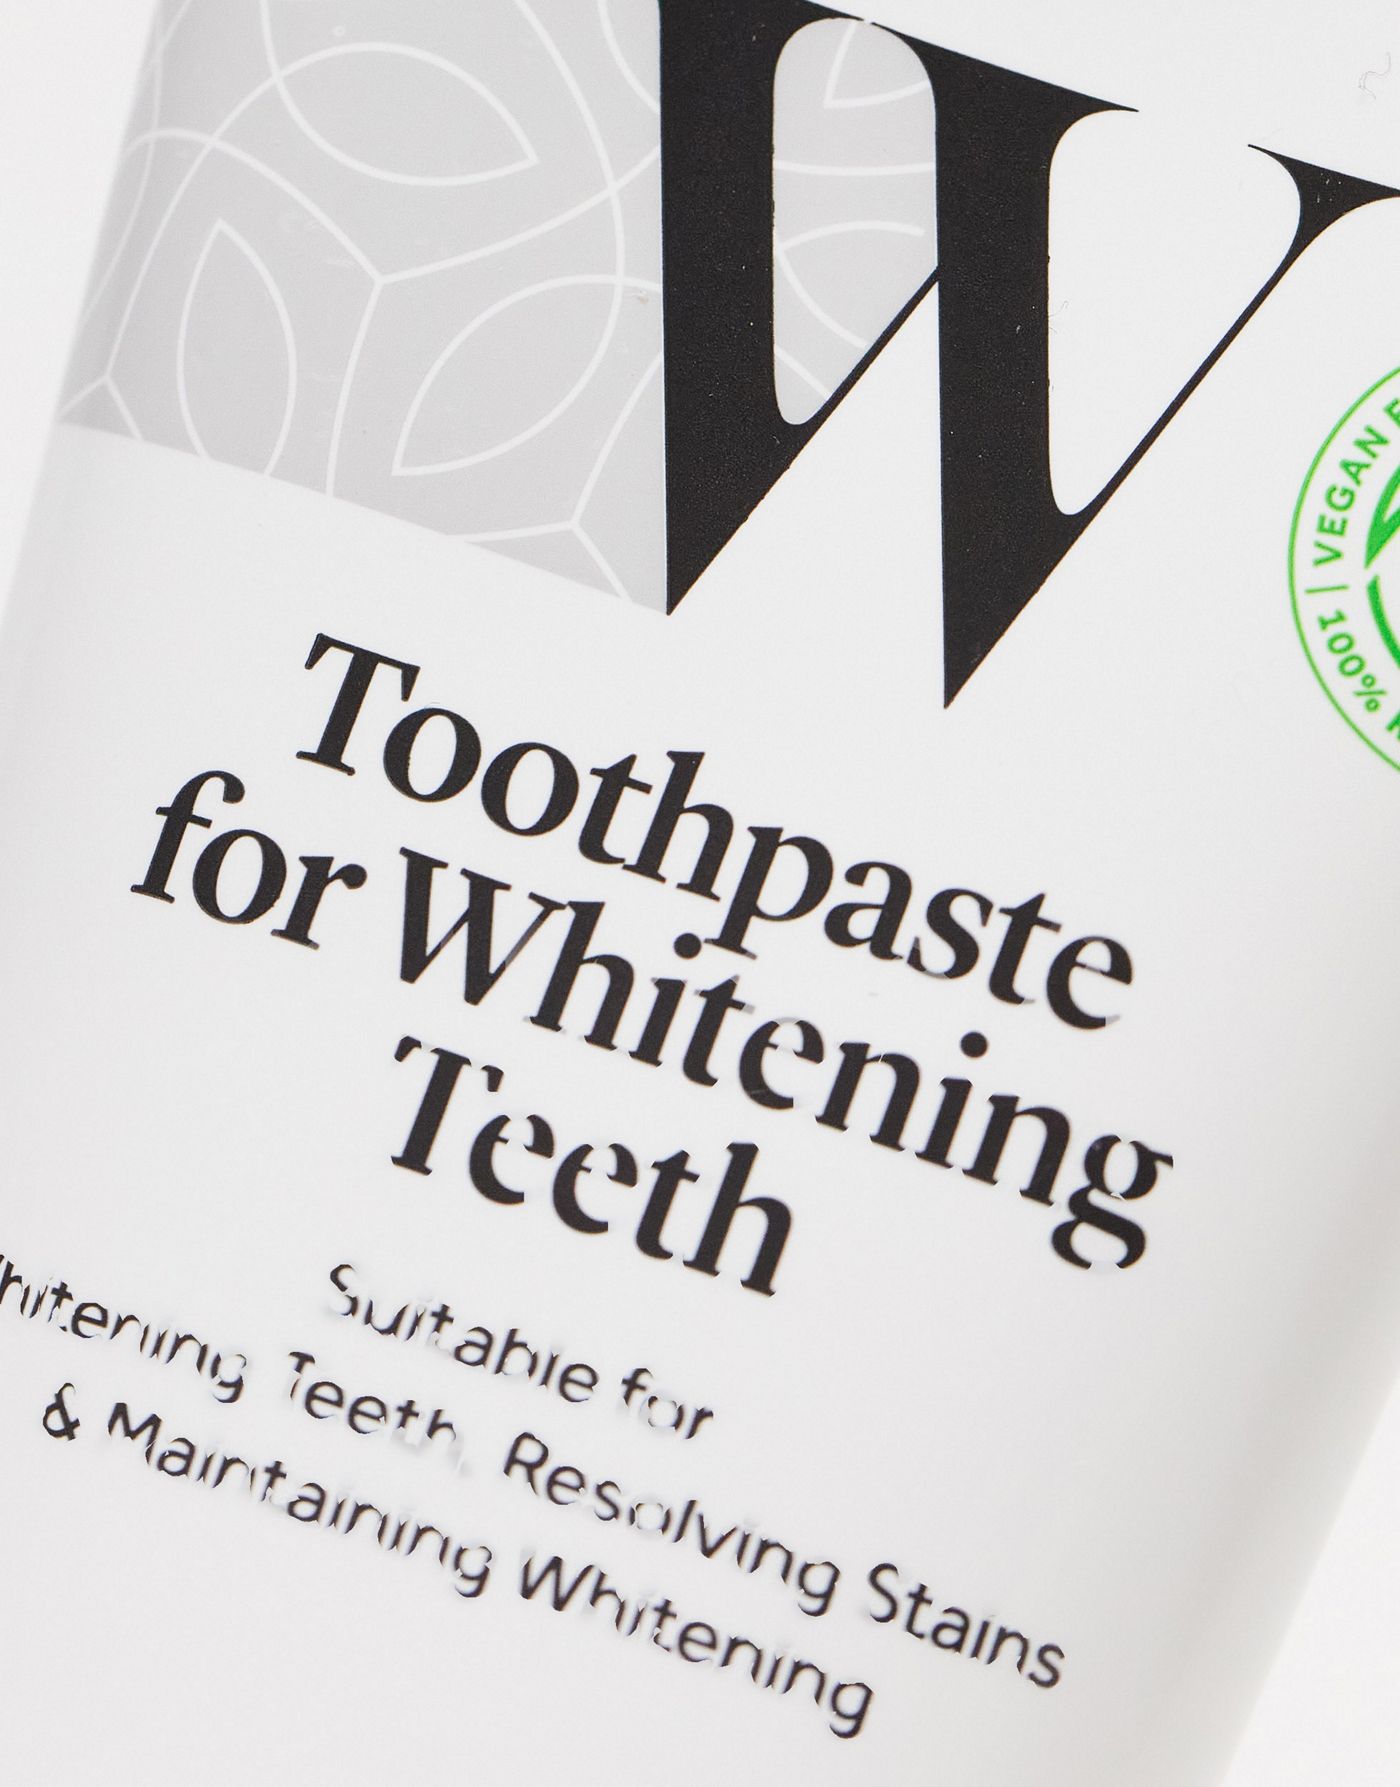 Spotlight Oral Care Toothpaste for Whitening Teeth